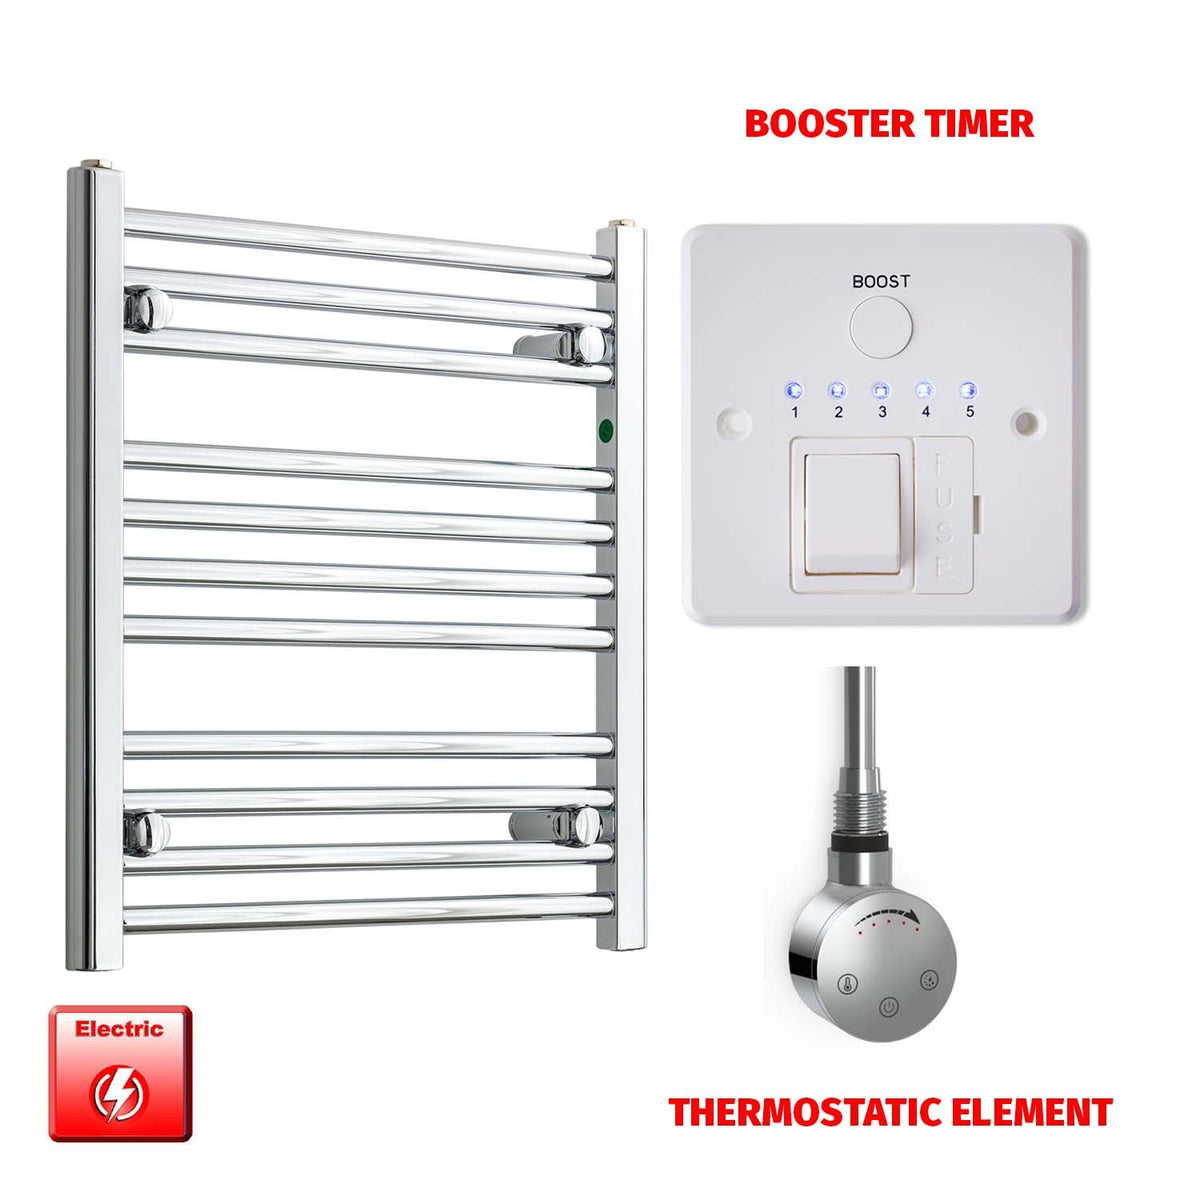 600mm High 500mm Wide Pre-Filled Electric Heated Towel Rail Radiator Straight or Curved Chrome SMR Thermostatic element Booster timer